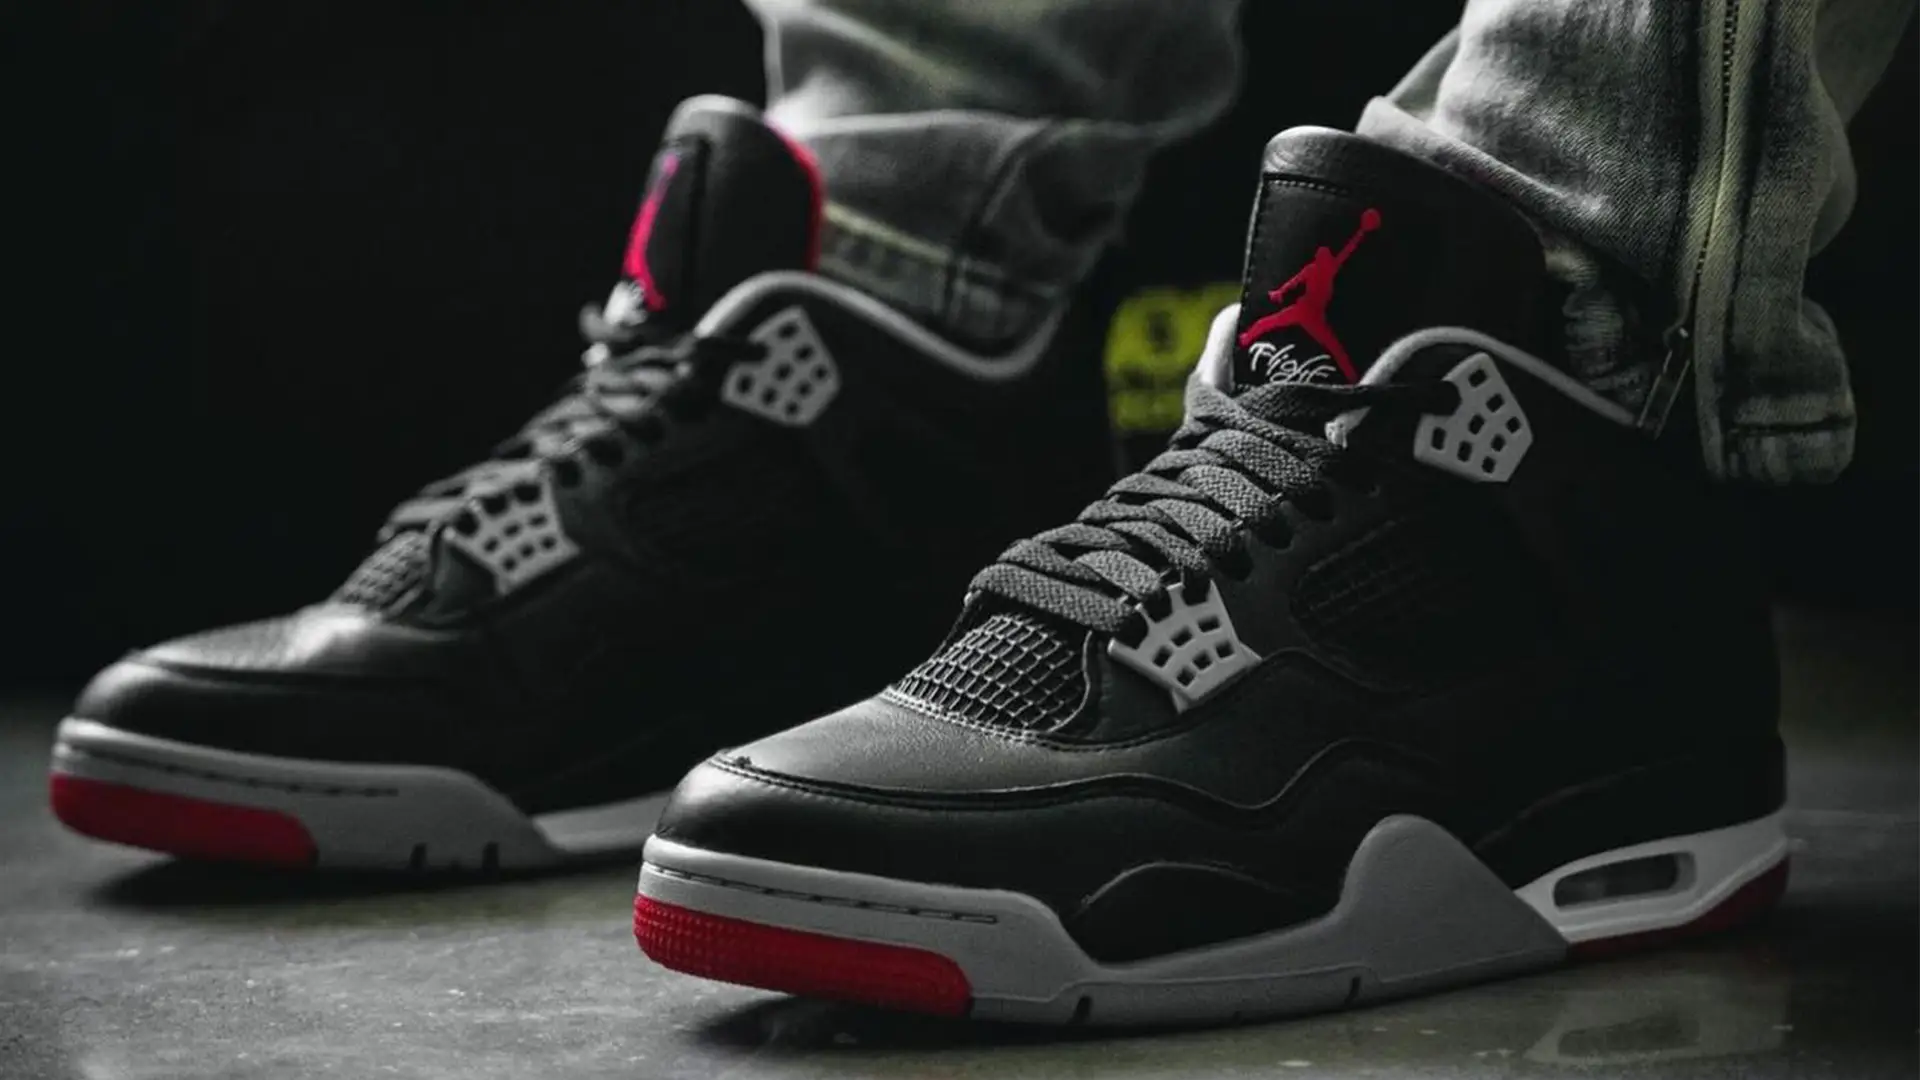 Here's an Official Look At the Air Jordan 4 